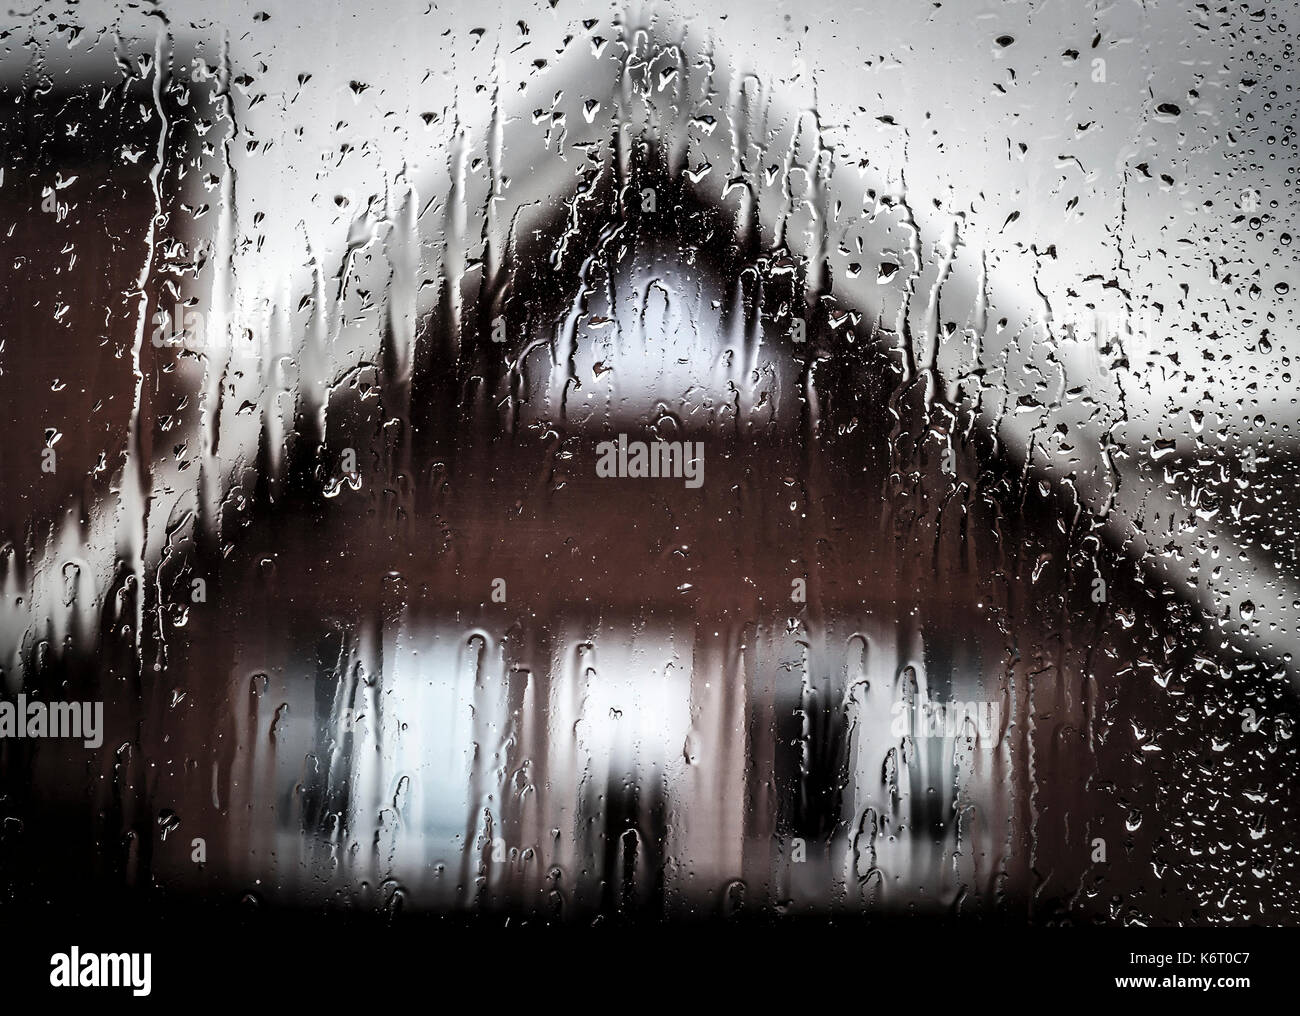 View a private home in rainy weather through the wet window. Stock Photo